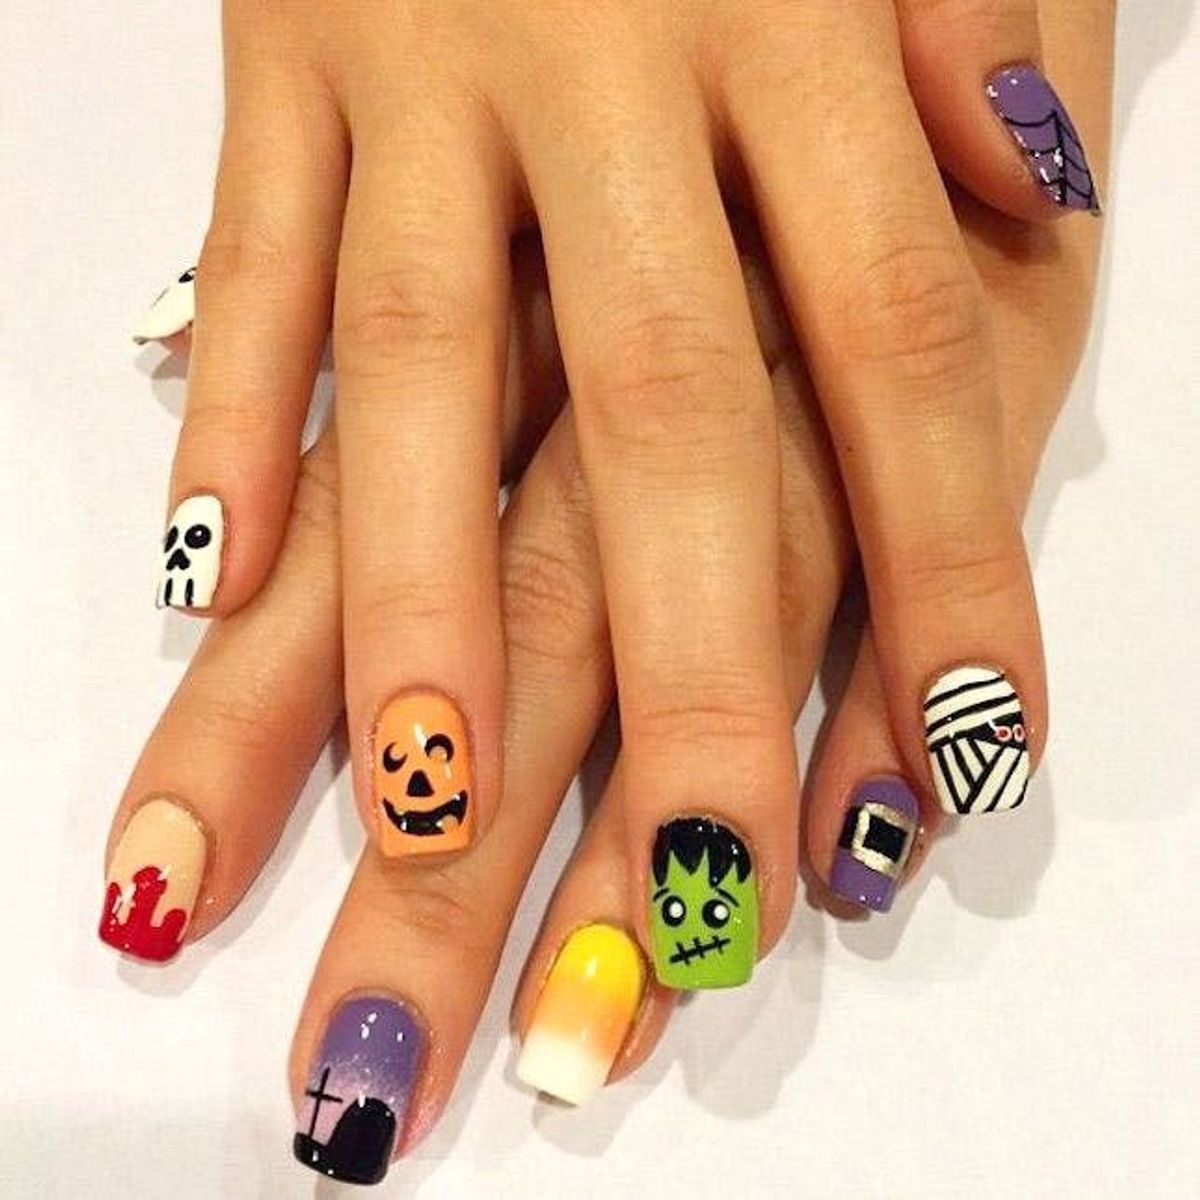 10 Must-Follow Nail Artists for Spooky Halloween Looks